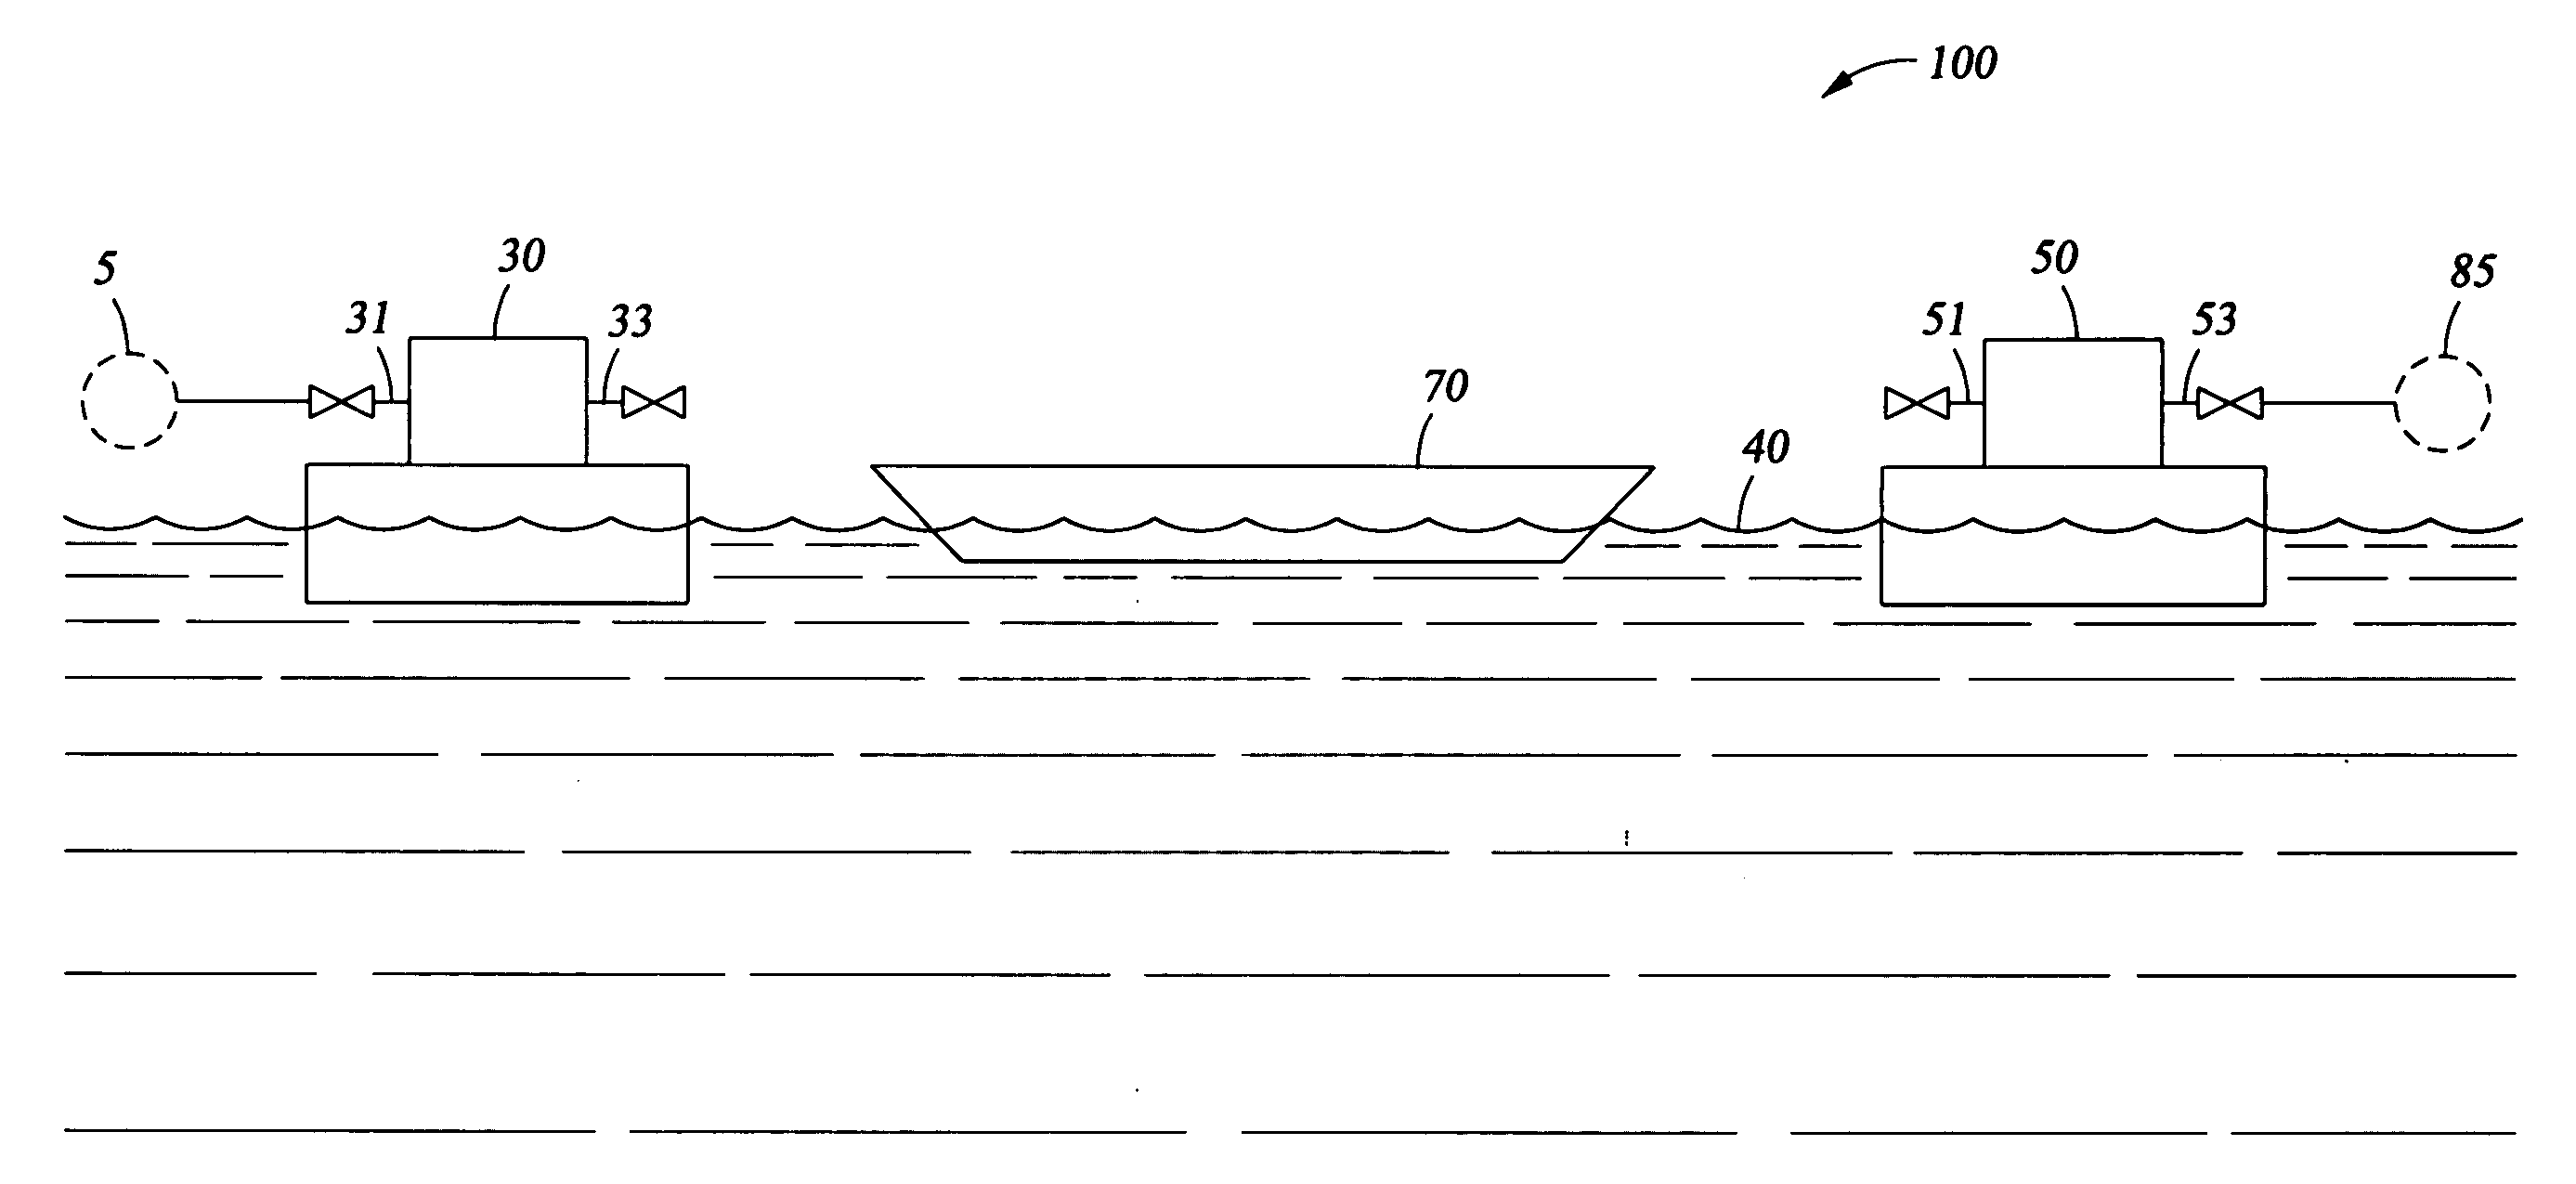 Apparatus for cryogenic fluids having floating liquefaction unit and floating regasification unit connected by shuttle vessel, and cryogenic fluid methods